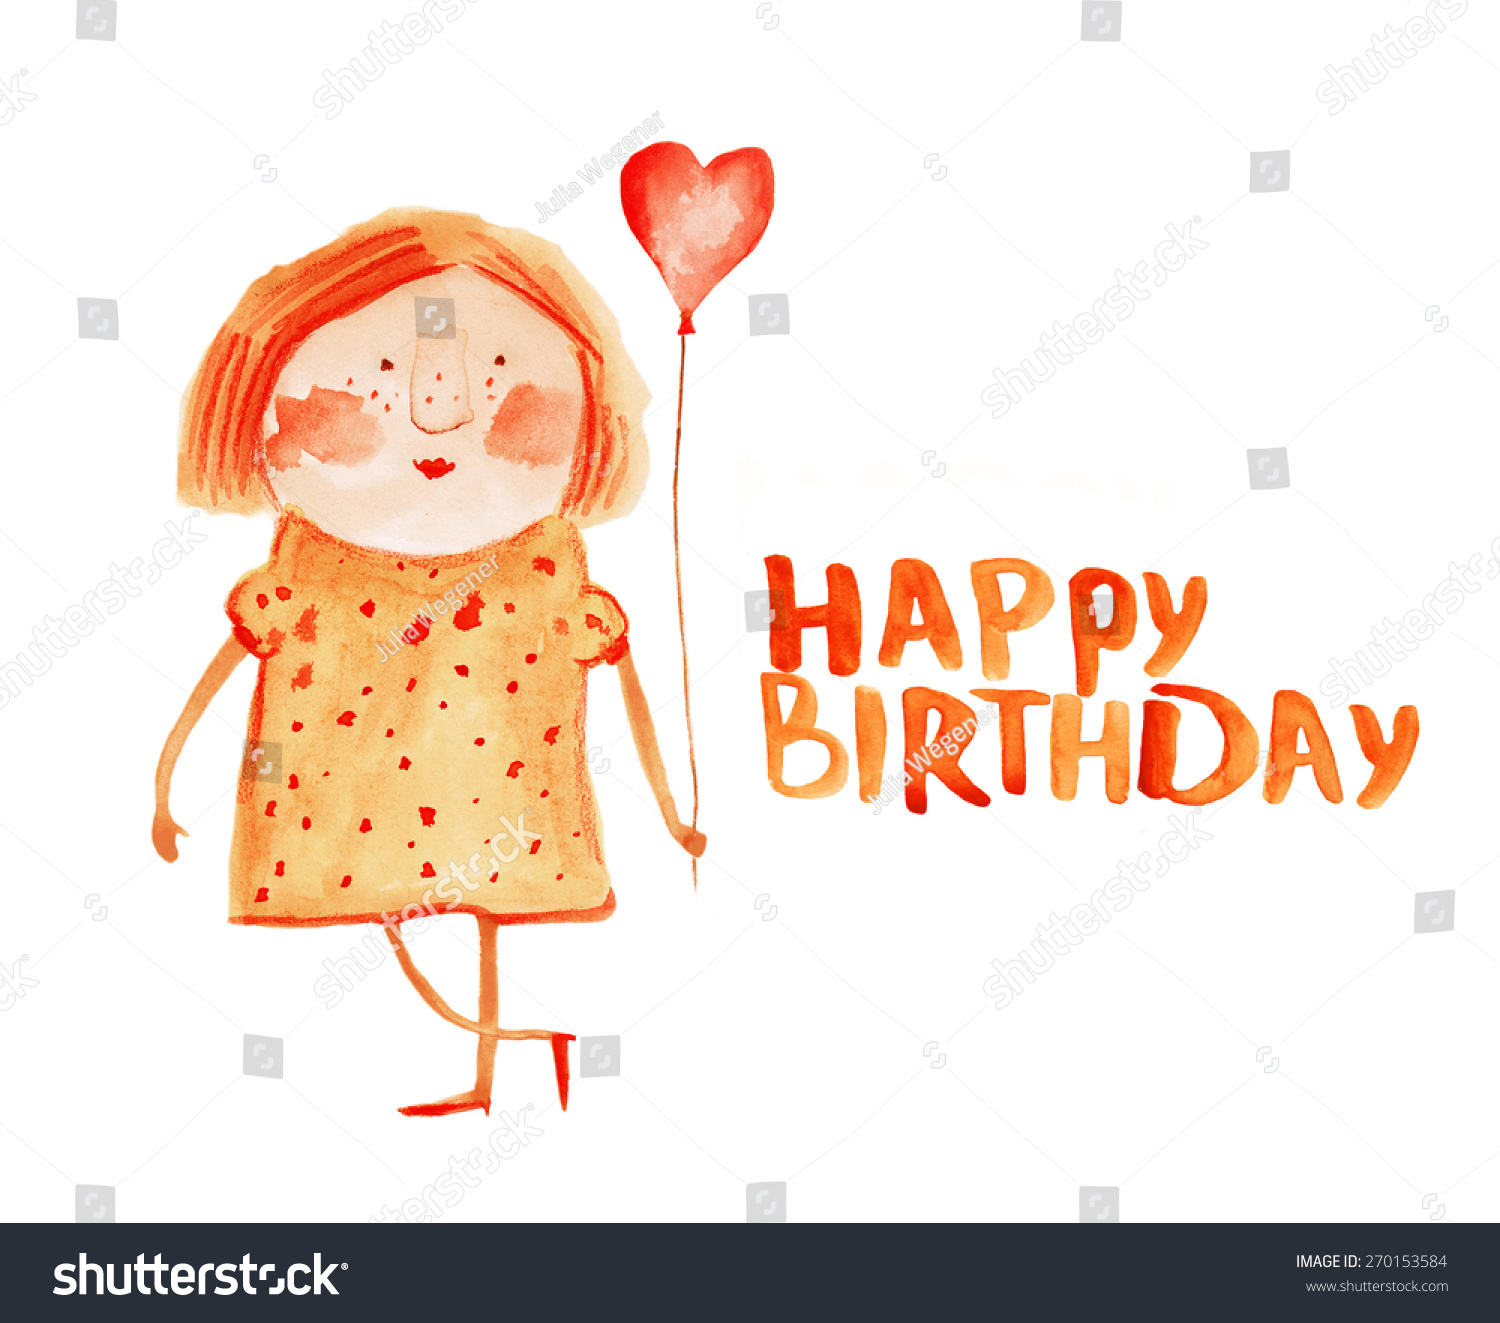 stock-photo-girl-with-red-hair-with-balloon-heart-happy-birthday-watercolor-illustration-hand-drawing-270153584.jpg